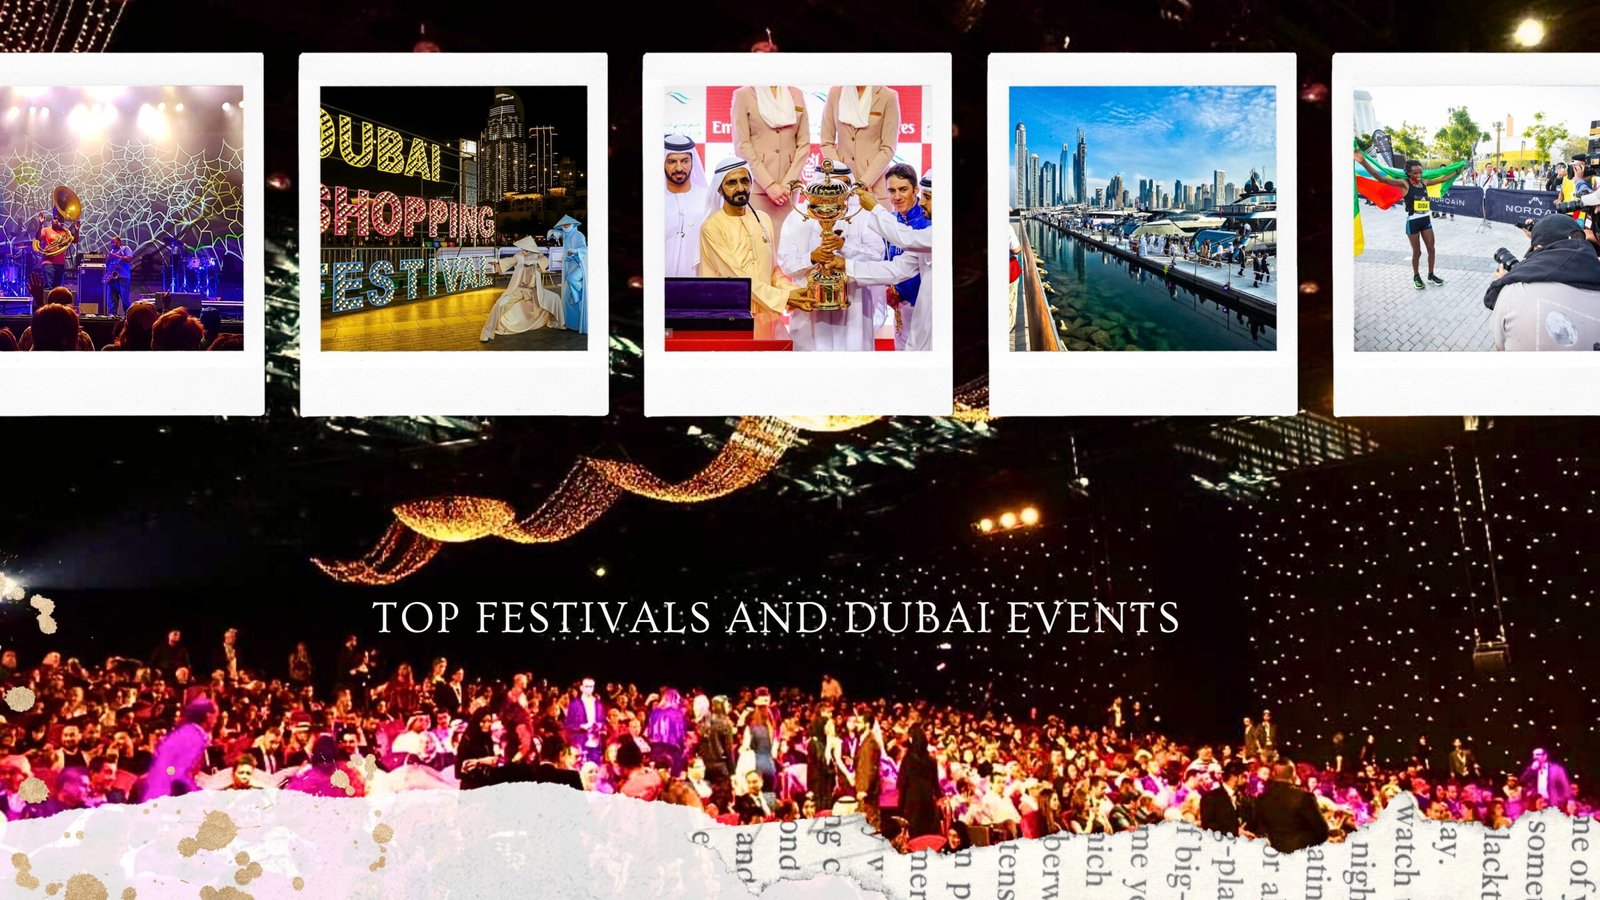 Top festivals and Dubai events you should not miss